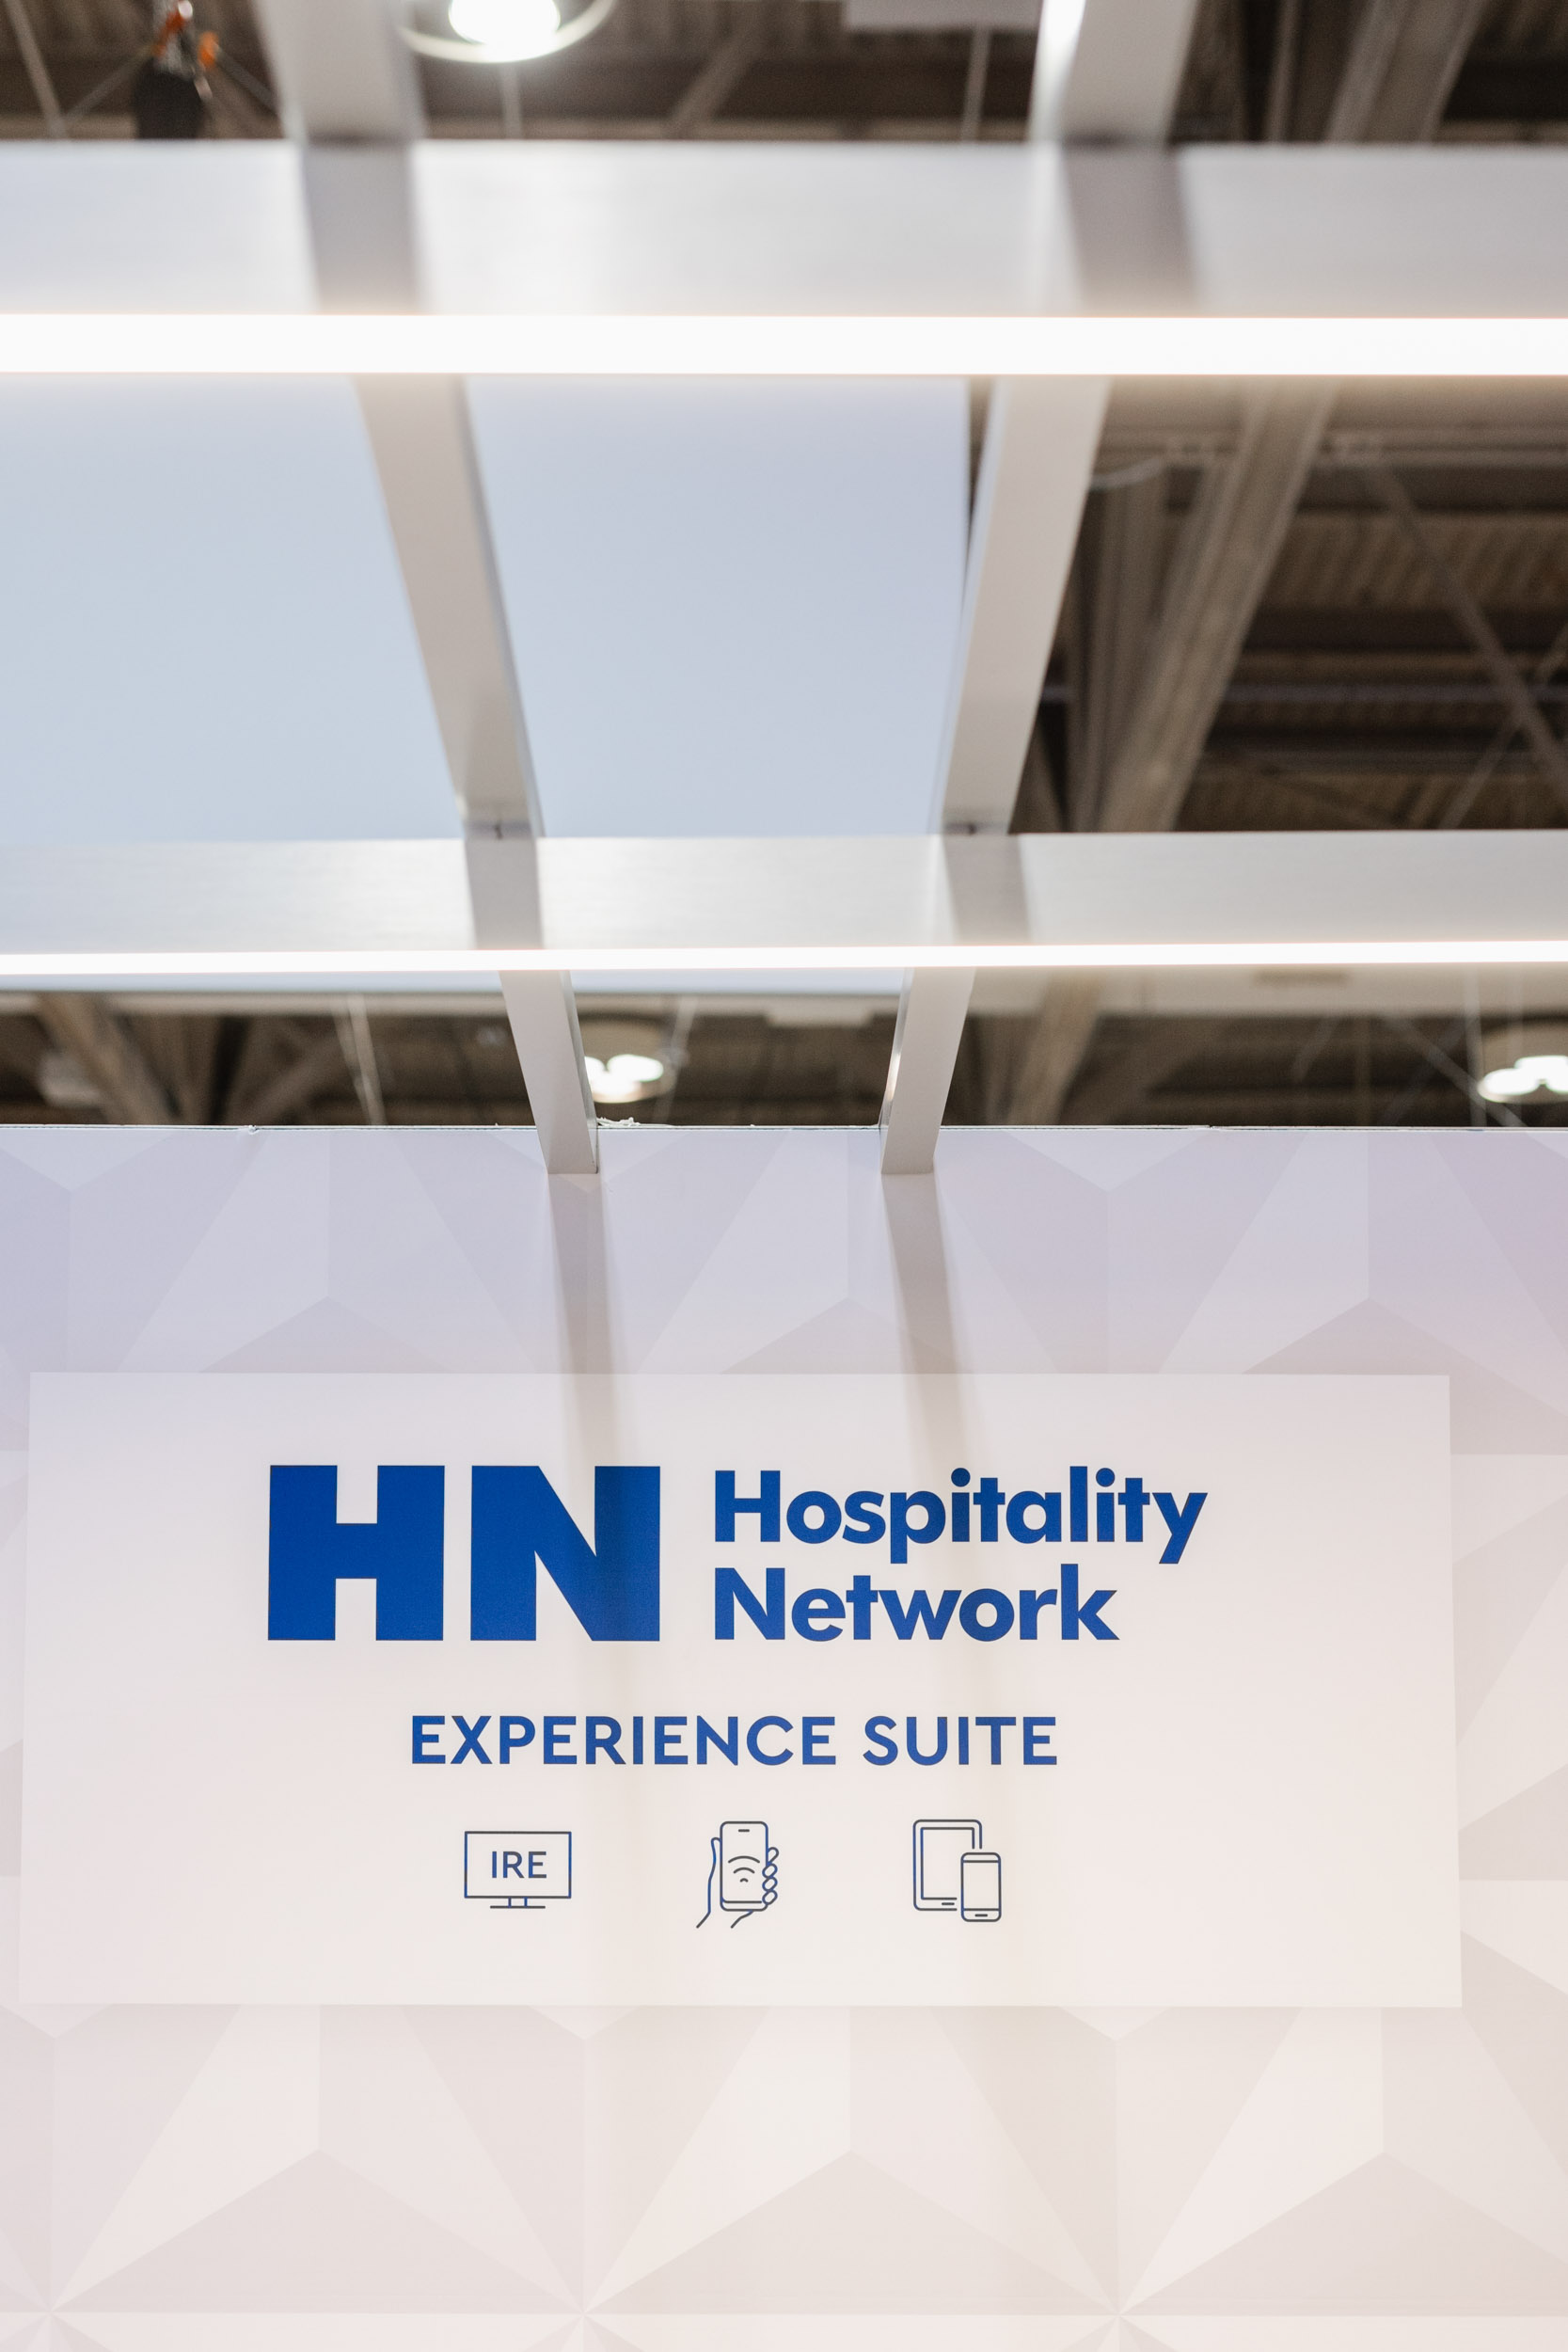 Hn hospitality suite at the Toronto Trade Show featuring photography experiences.